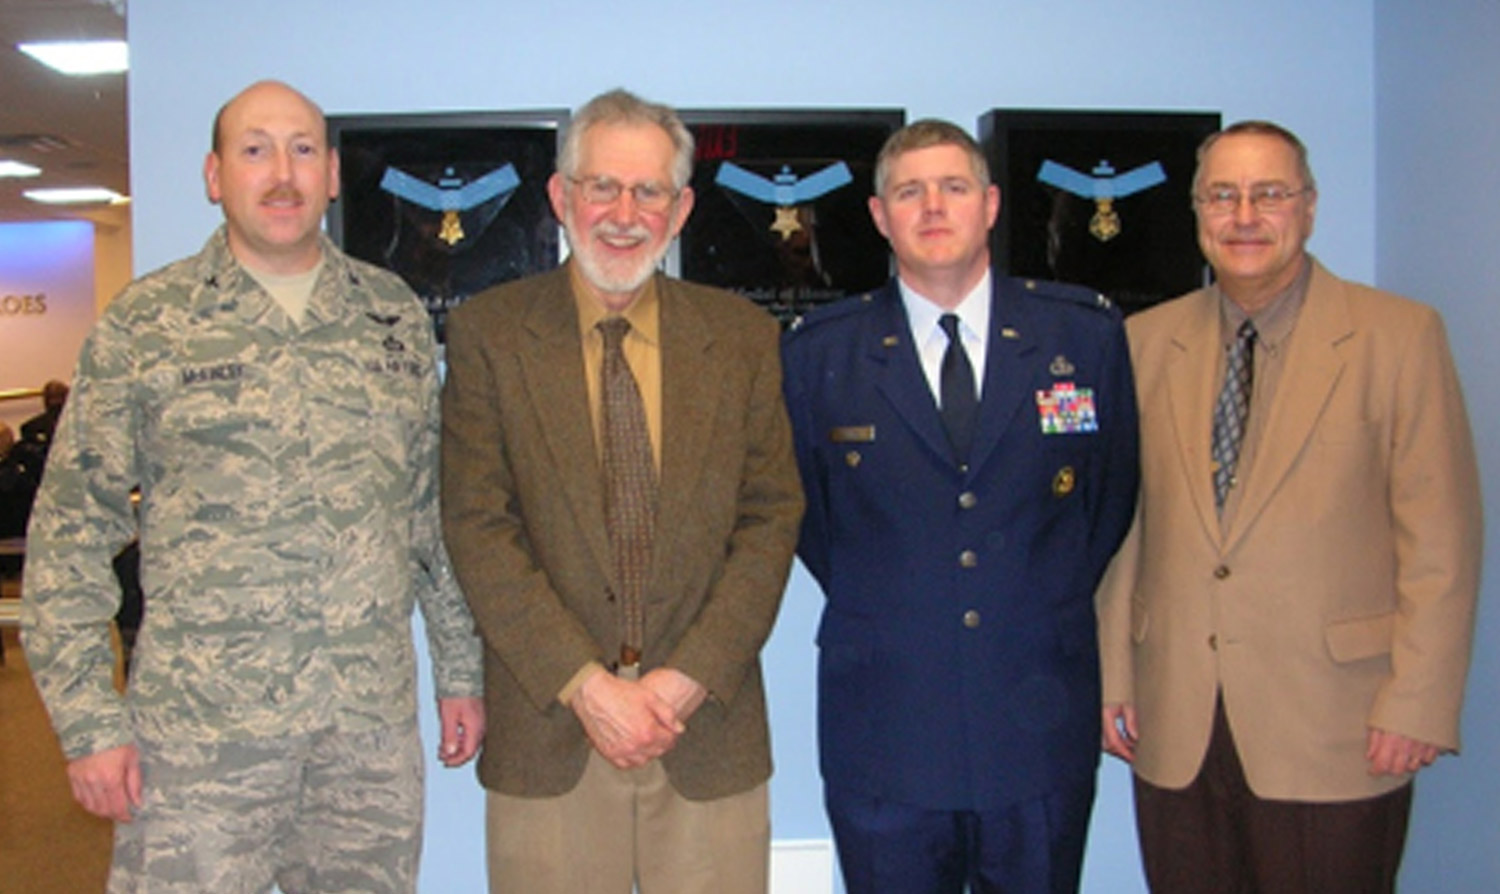 Pictured above (L-R): Air Force Colonel Eric McKinley; Joseph Zabransky, former PSU professor; Craig Souza; and retired Army Lt. Colonel James Koermer, professor emeritus of meteorology, at the Hall of Heroes in Washington, DC. (2009)